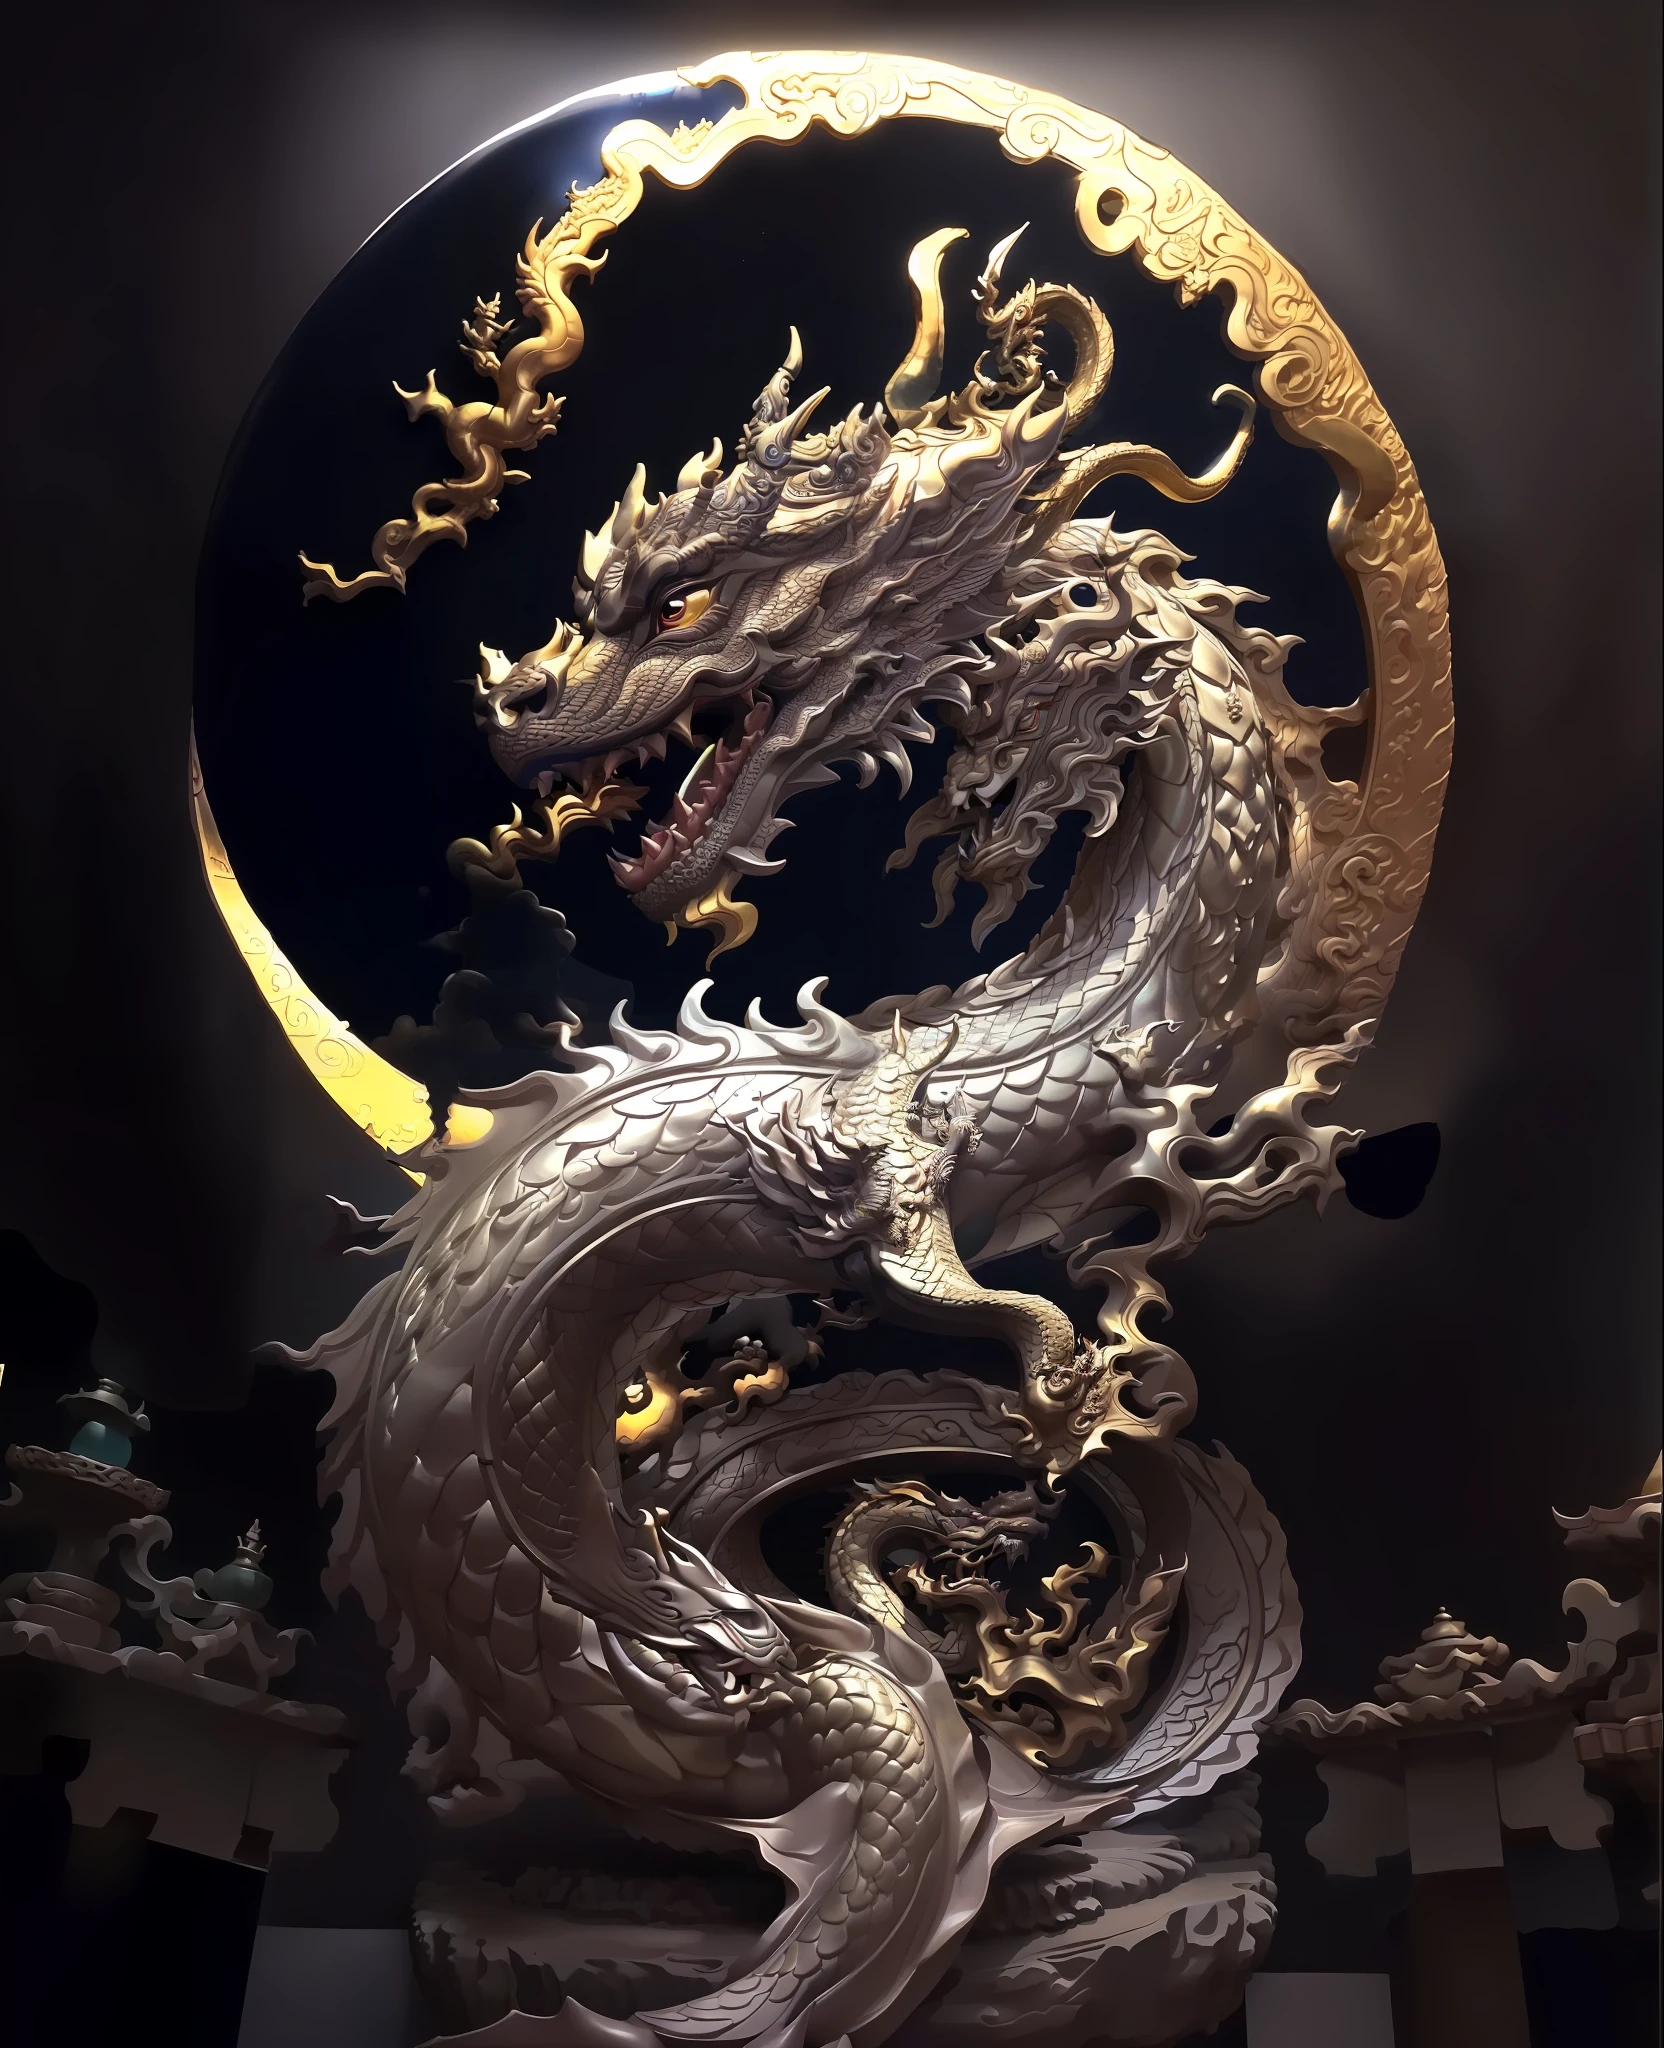 a close up of a dragon statue with a full moon in the background, smooth chinese dragon, chinese dragon concept art, dragon art, loong, chinese dragon, majestic japanese dragon, dragon, a dragon, dragon centered, oil painting of dragon, god of dragons, lung dragon, golden dragon, chinese fantasy, by Yang J, dragon snake with wings